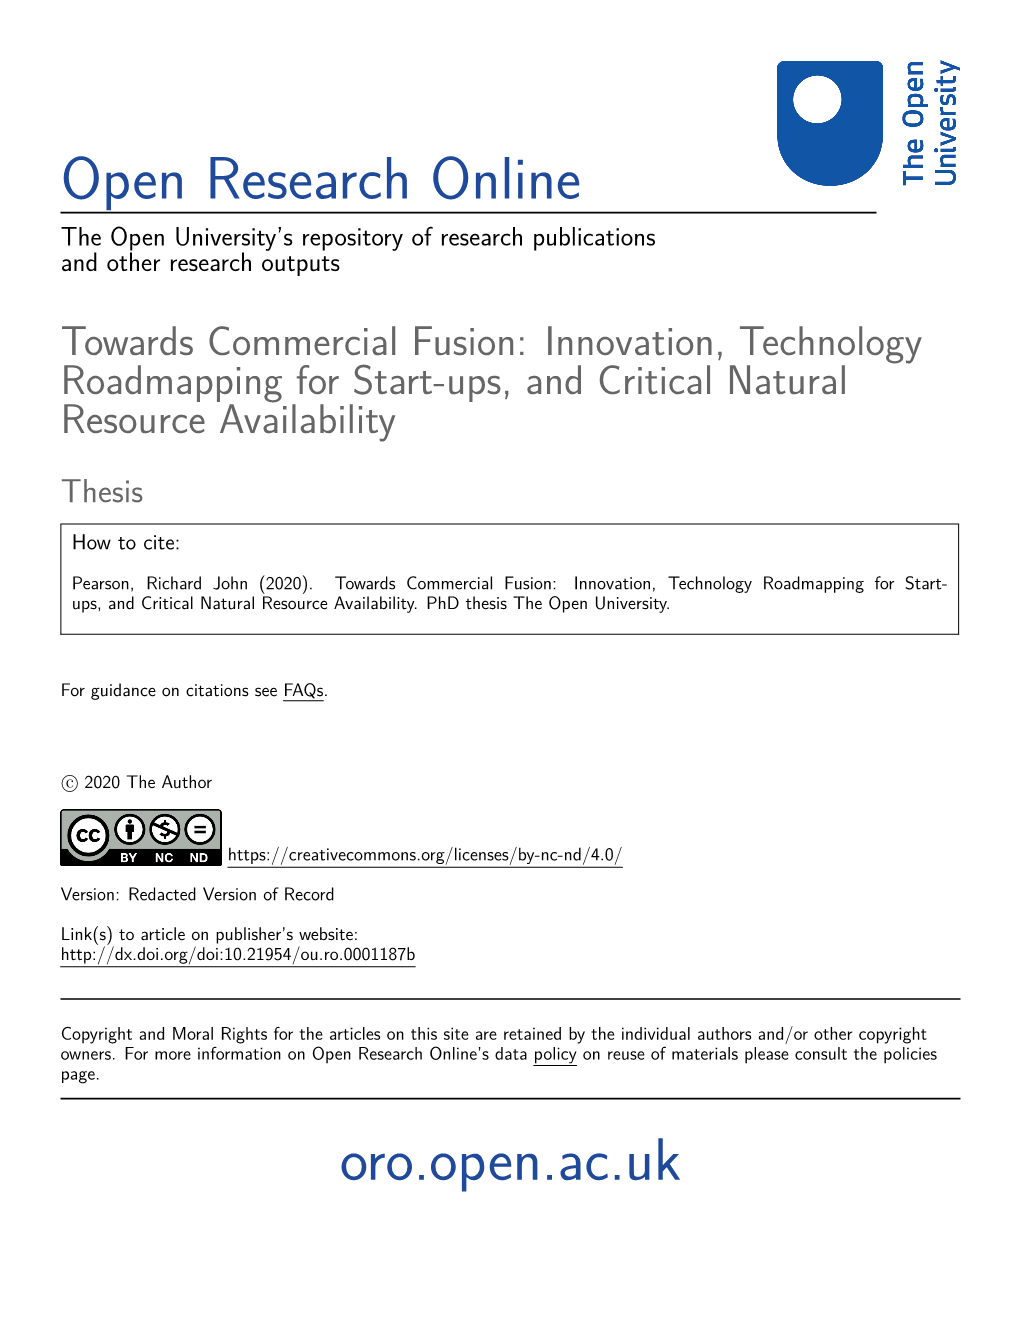 Towards Commercial Fusion: Innovation, Technology Roadmapping for Start-Ups, and Critical Natural Resource Availability